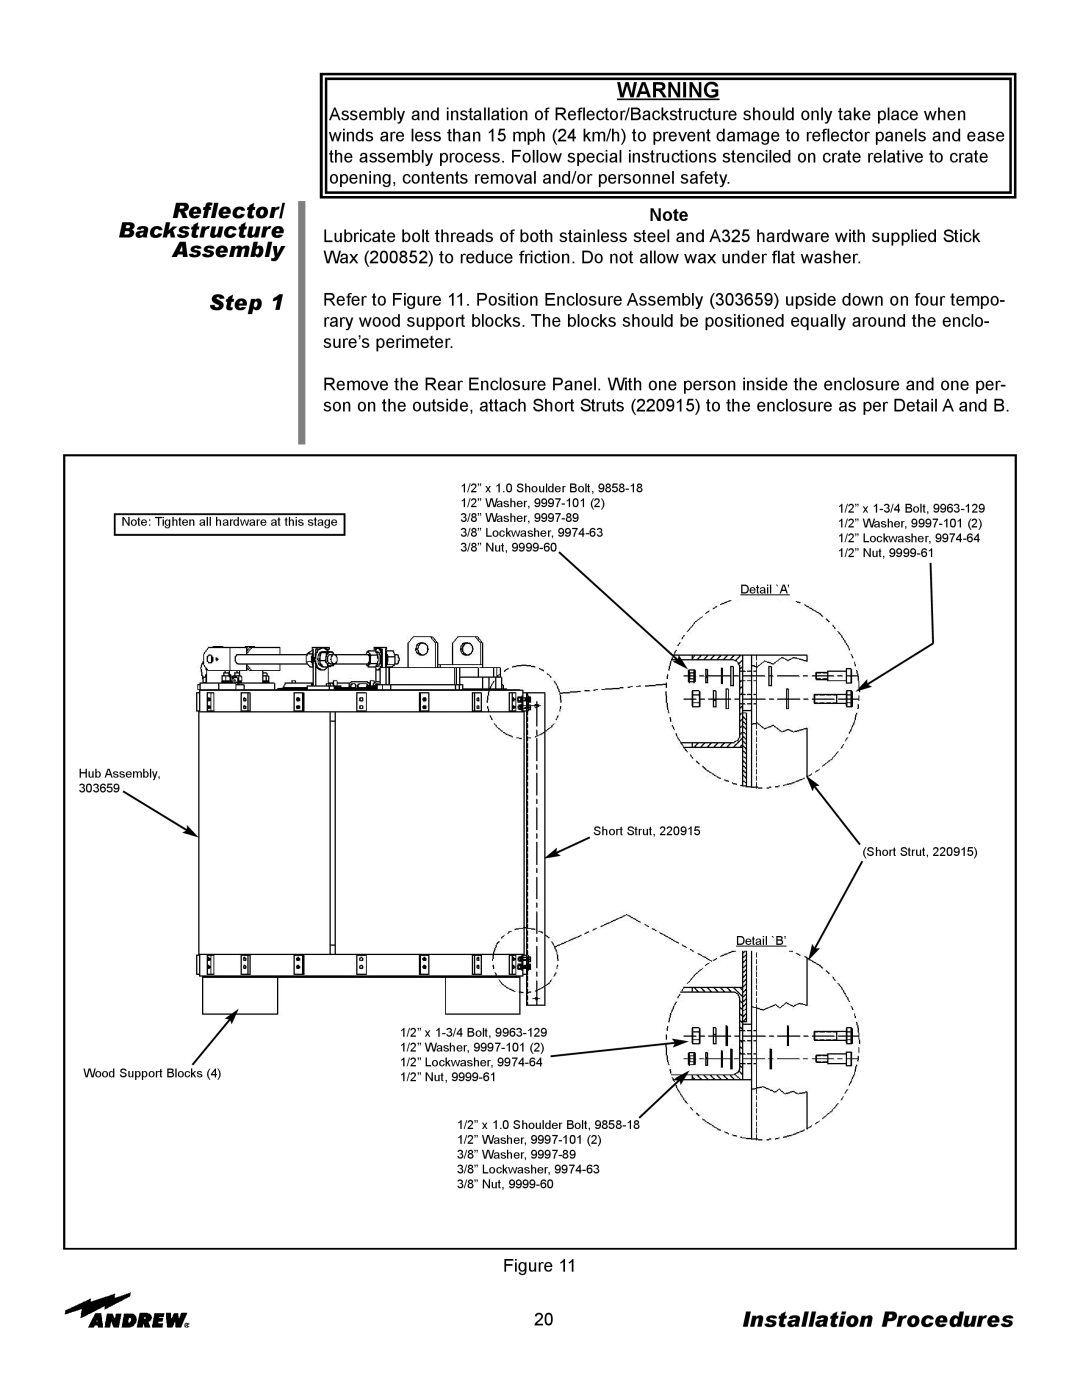 Andrew ES76PK-1 installation instructions Reflector Backstructure Assembly Step, Installation Procedures 